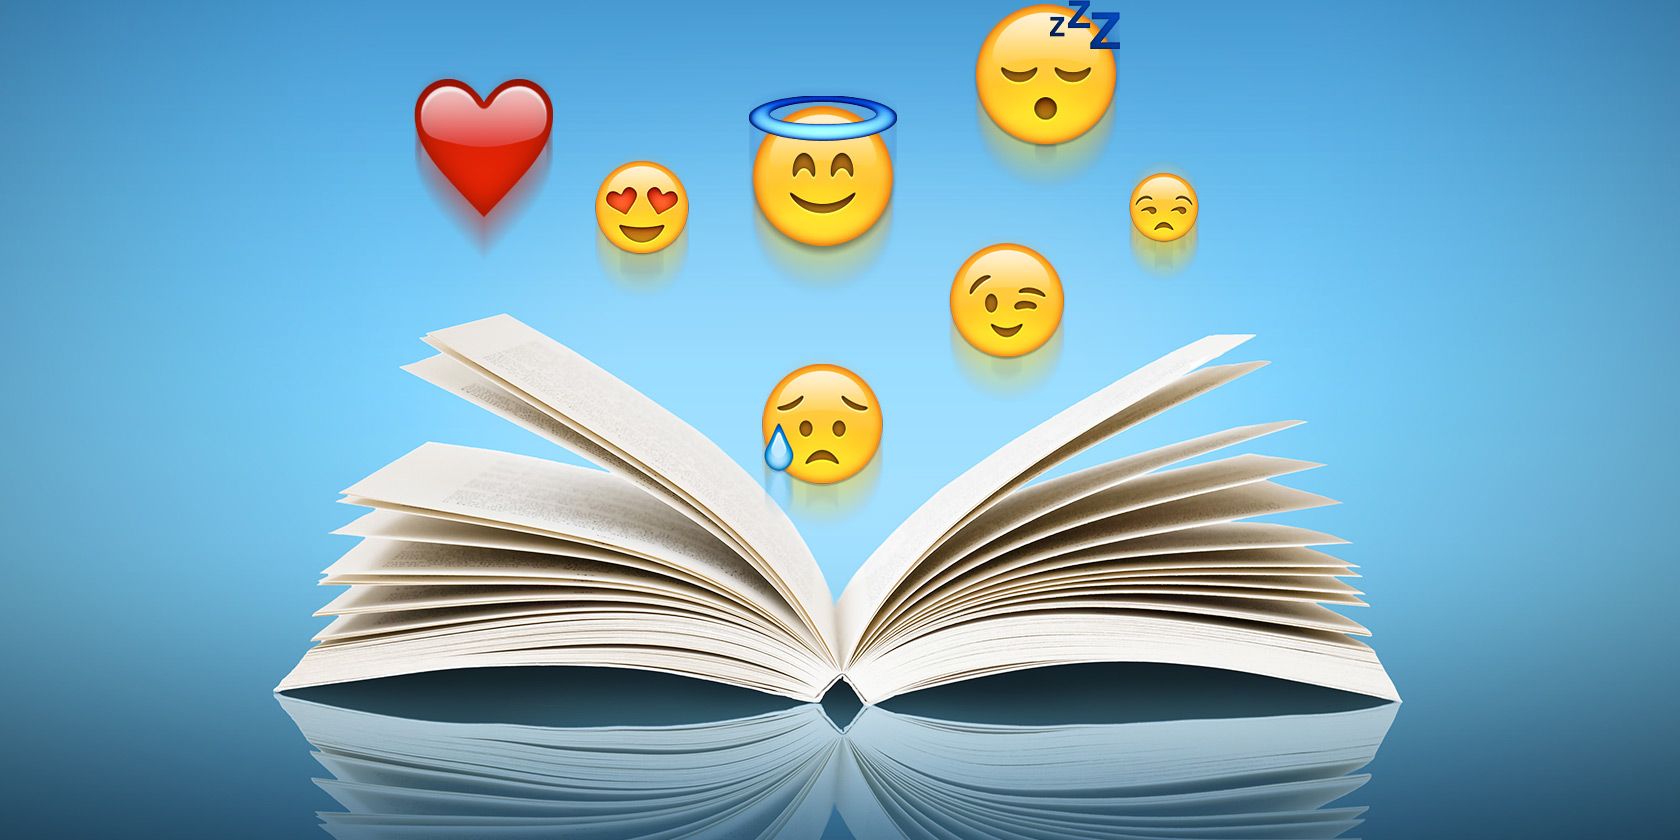 emoji dictionary meanings book